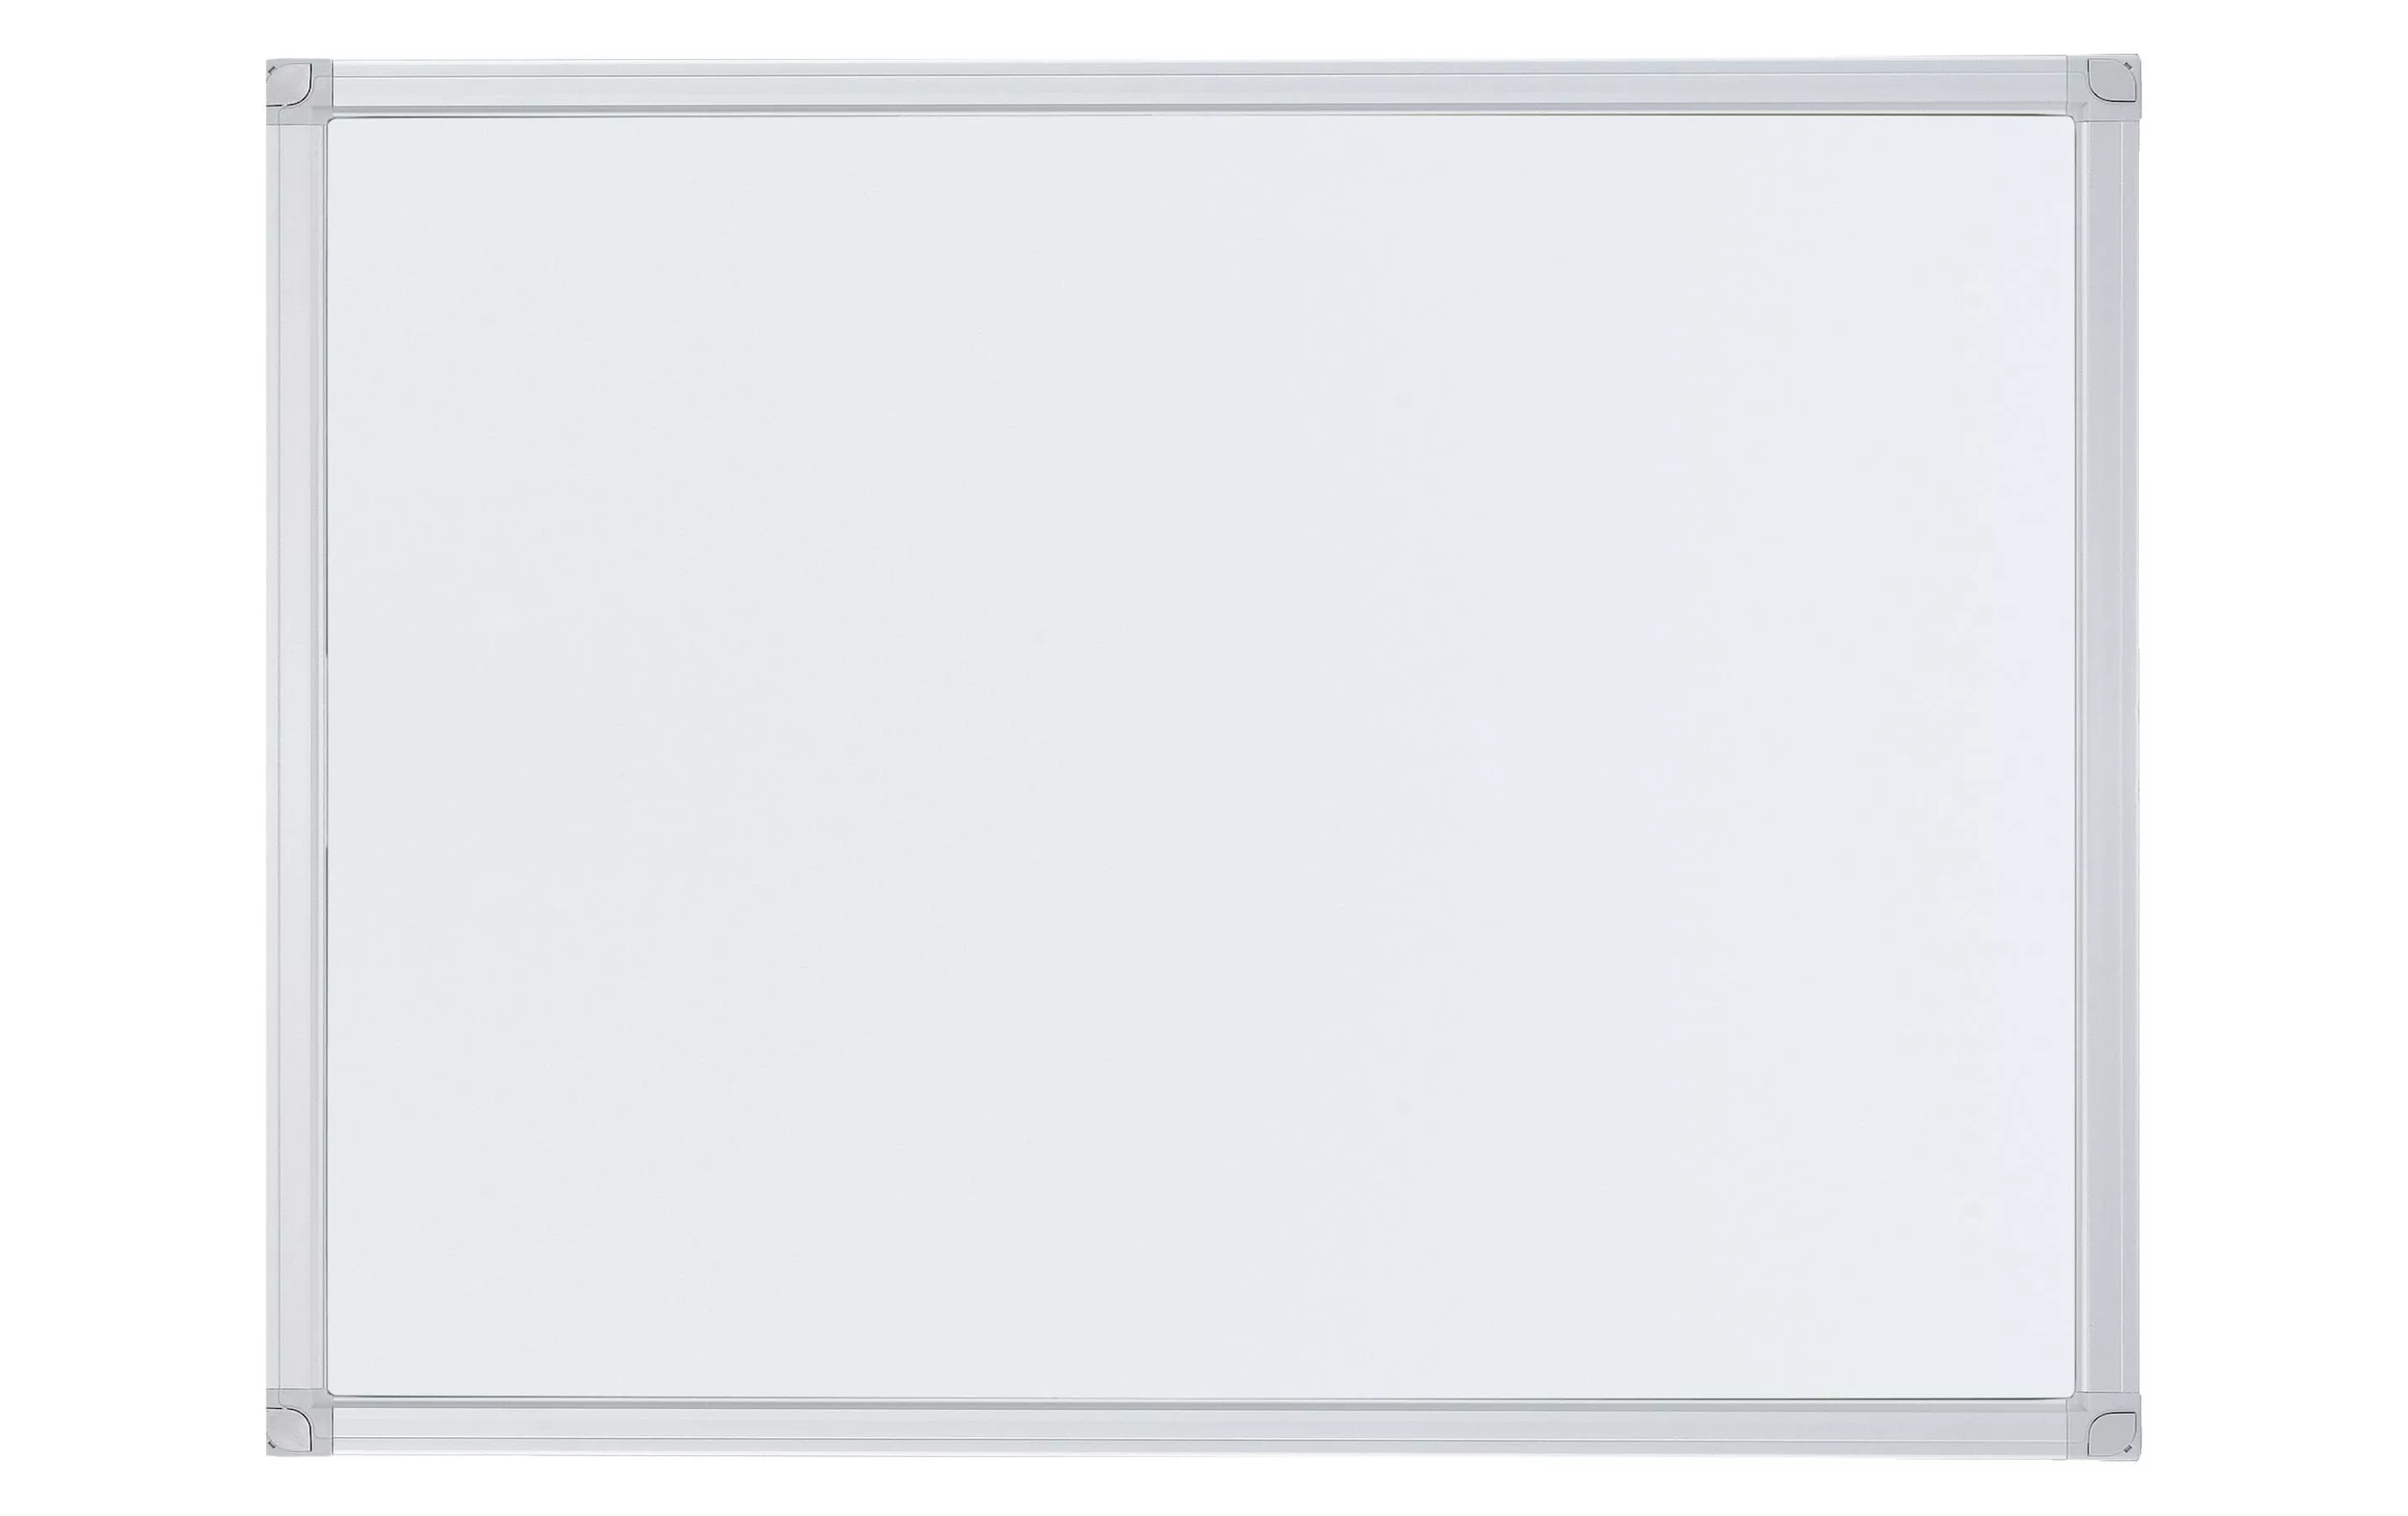 Magnethaftendes Whiteboard X-tra!Line 60 cm x 90 cm, Weiss